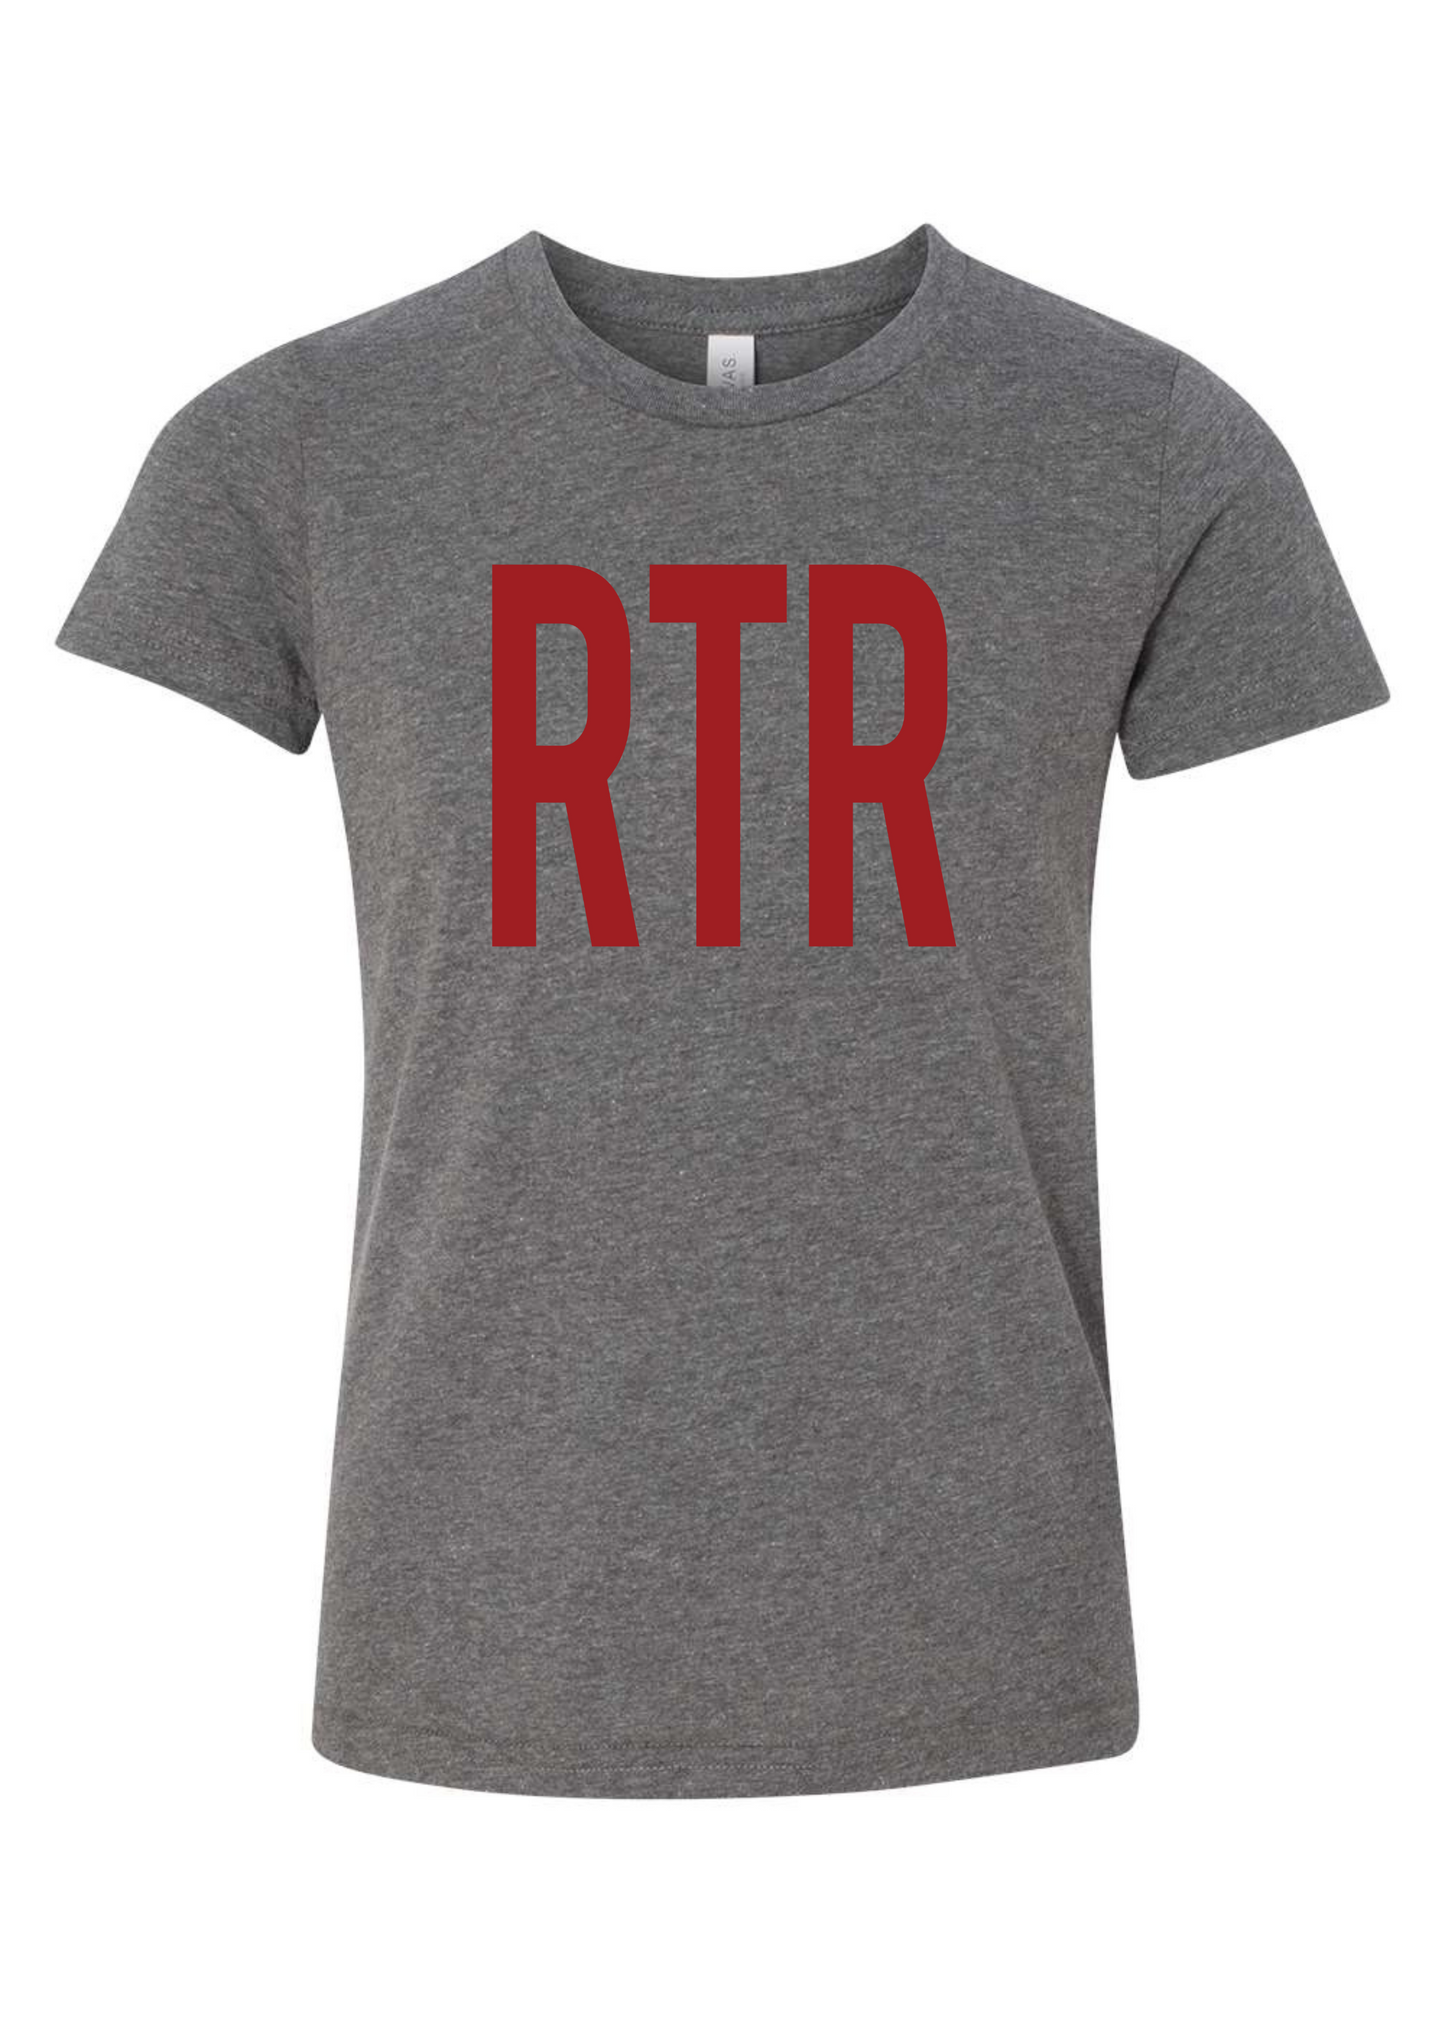 RTR | Kids Tee-Kids Tees-Sister Shirts-Sister Shirts, Cute & Custom Tees for Mama & Littles in Trussville, Alabama.